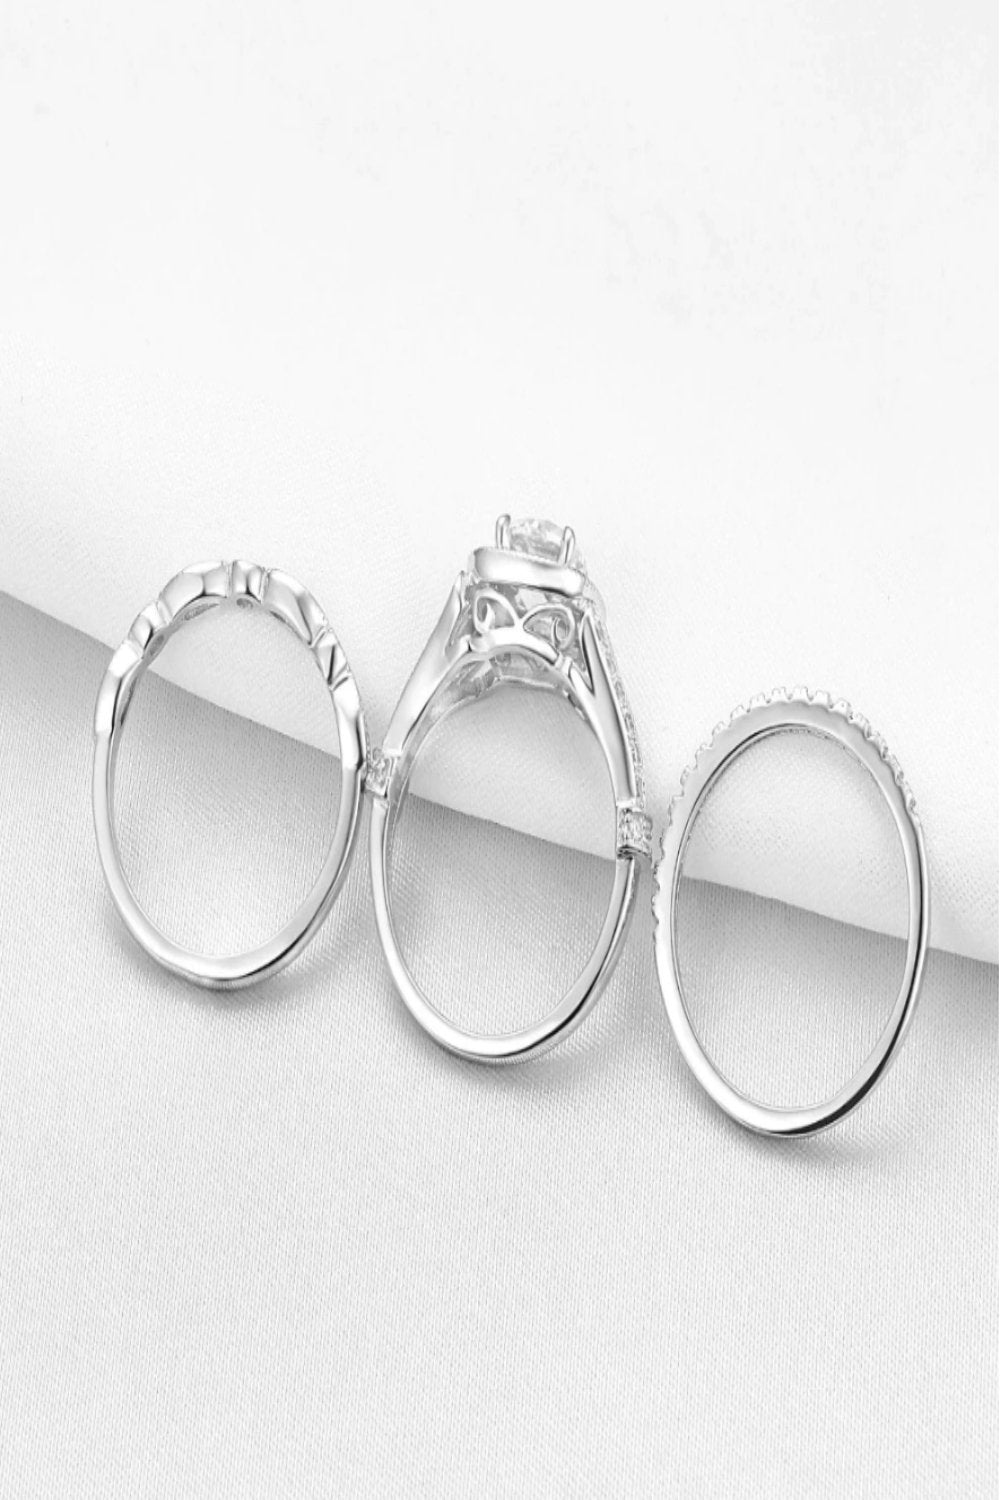 3 Piece Sterling Silver Engagement Ring Set - TGC Boutique - rings